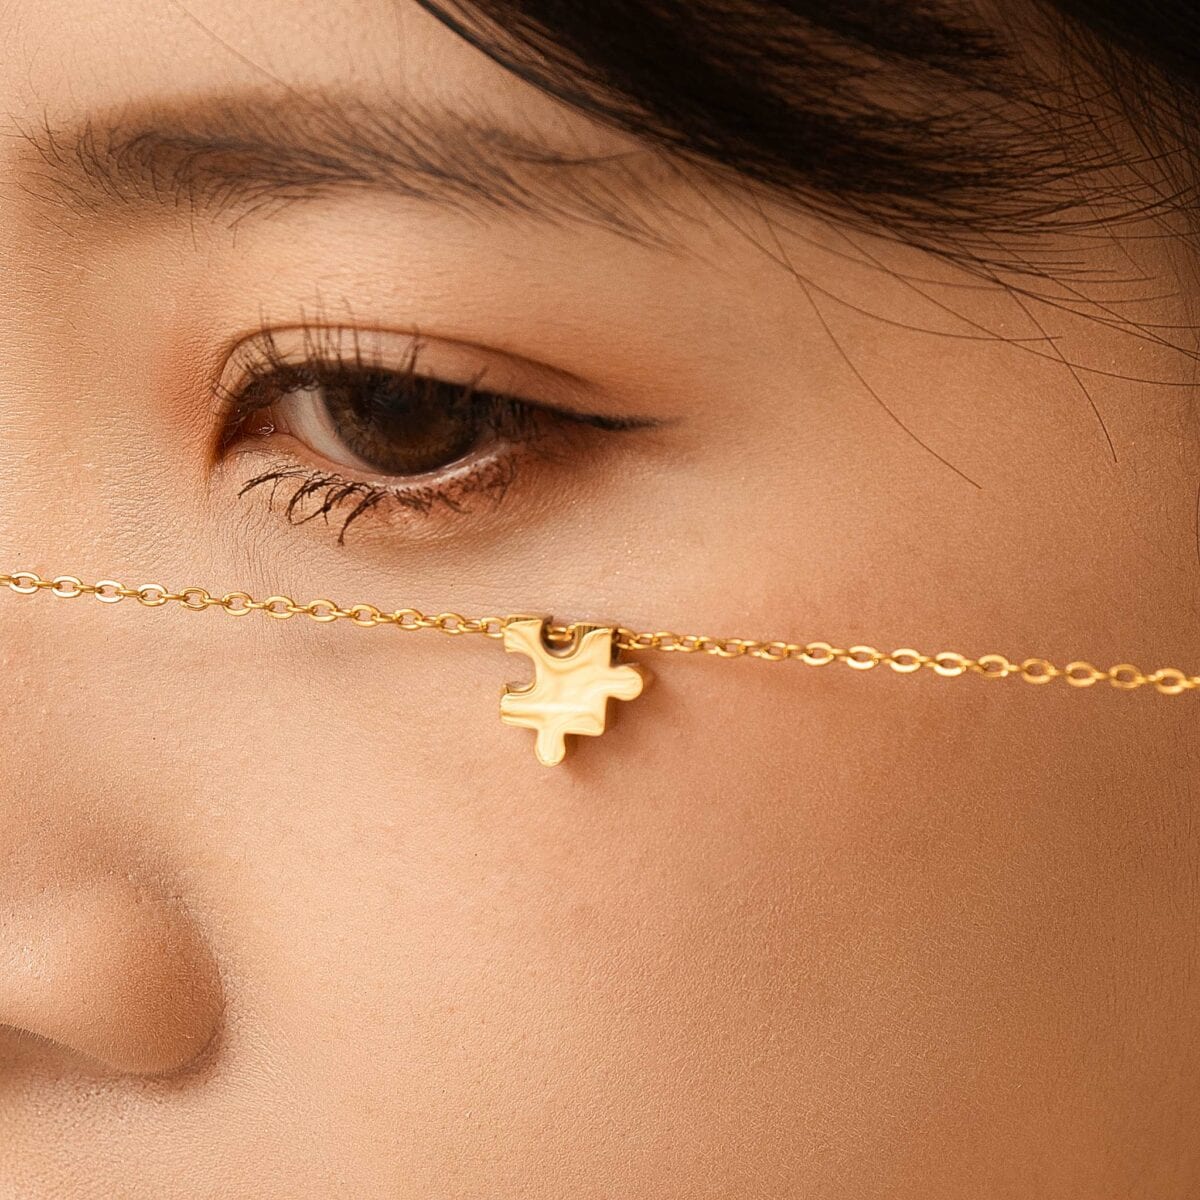 https://m.clubbella.co/product/duna-gold-puzzle-charm-bracelet/ Duna Puzzle Gold Charm Bracelet (1)